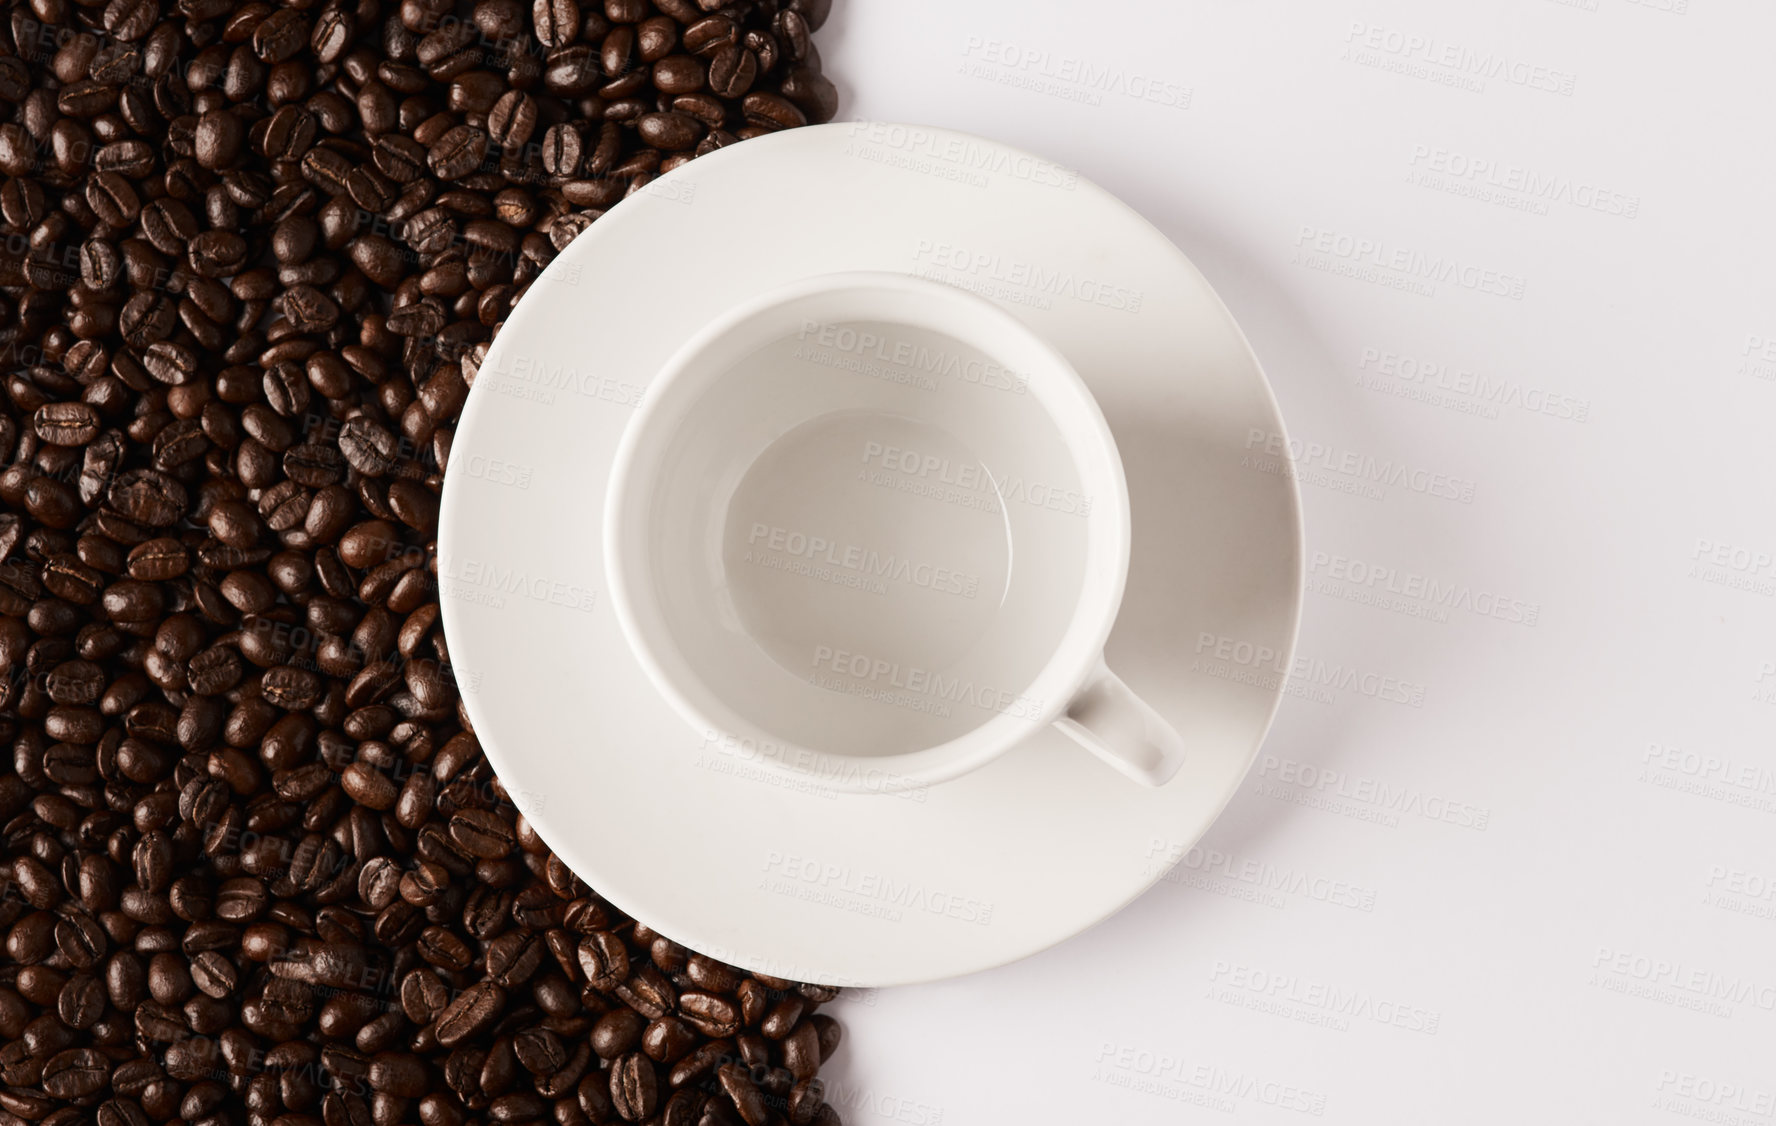 Buy stock photo Closeup shot of an empty cup and saucer against a half-and-half background of coffee beans